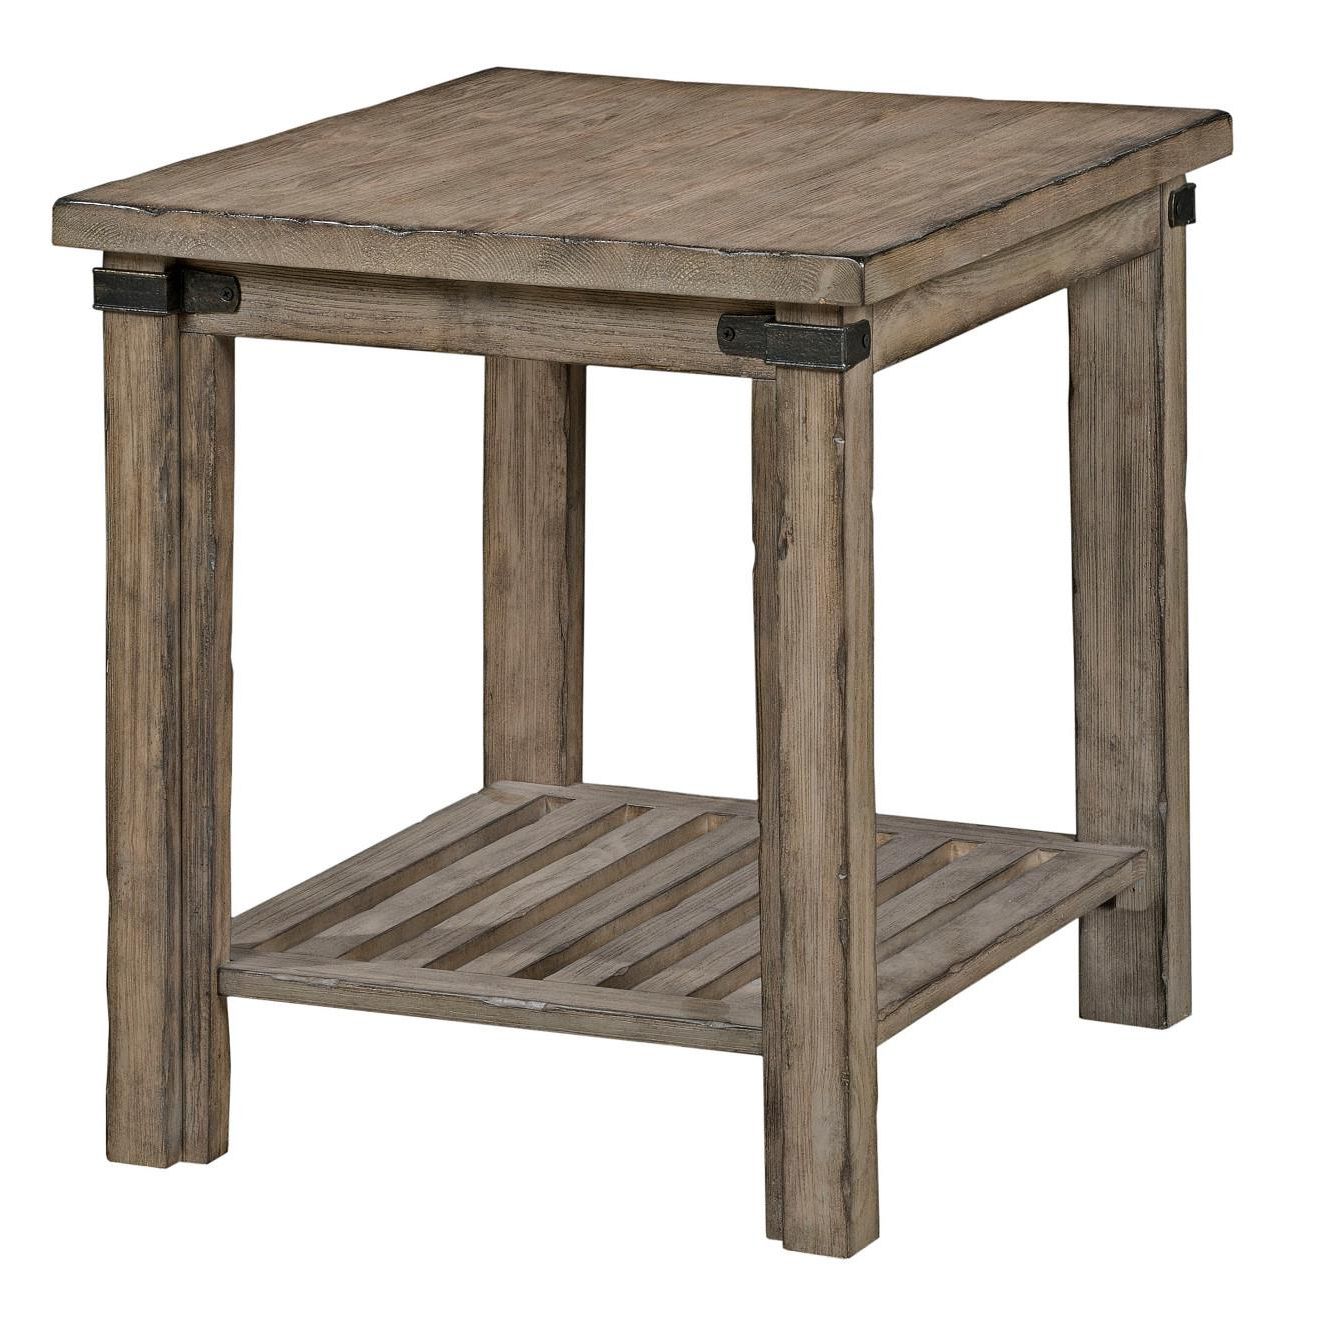 Kincaid Furniture Foundry Rustic Weathered Gray End Table | Johnny Inside Rustic Gray End Tables (View 5 of 20)